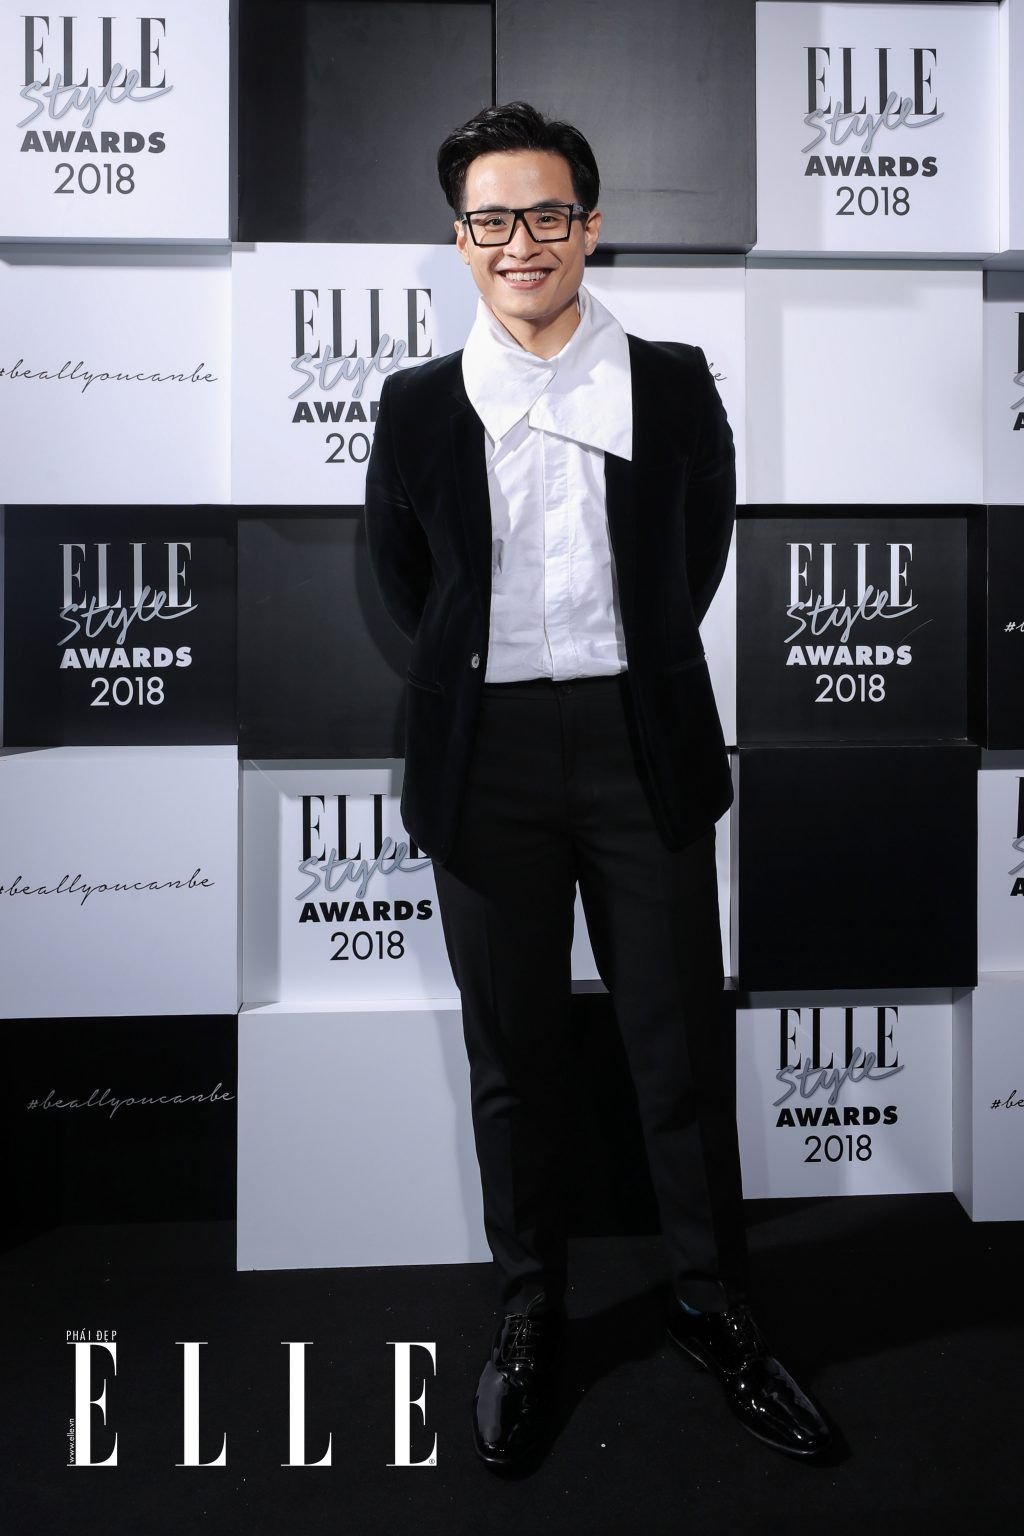 Ha Anh Tuan became the owner of the Achievement of the Year award at ELLE Style Awards 2018 1